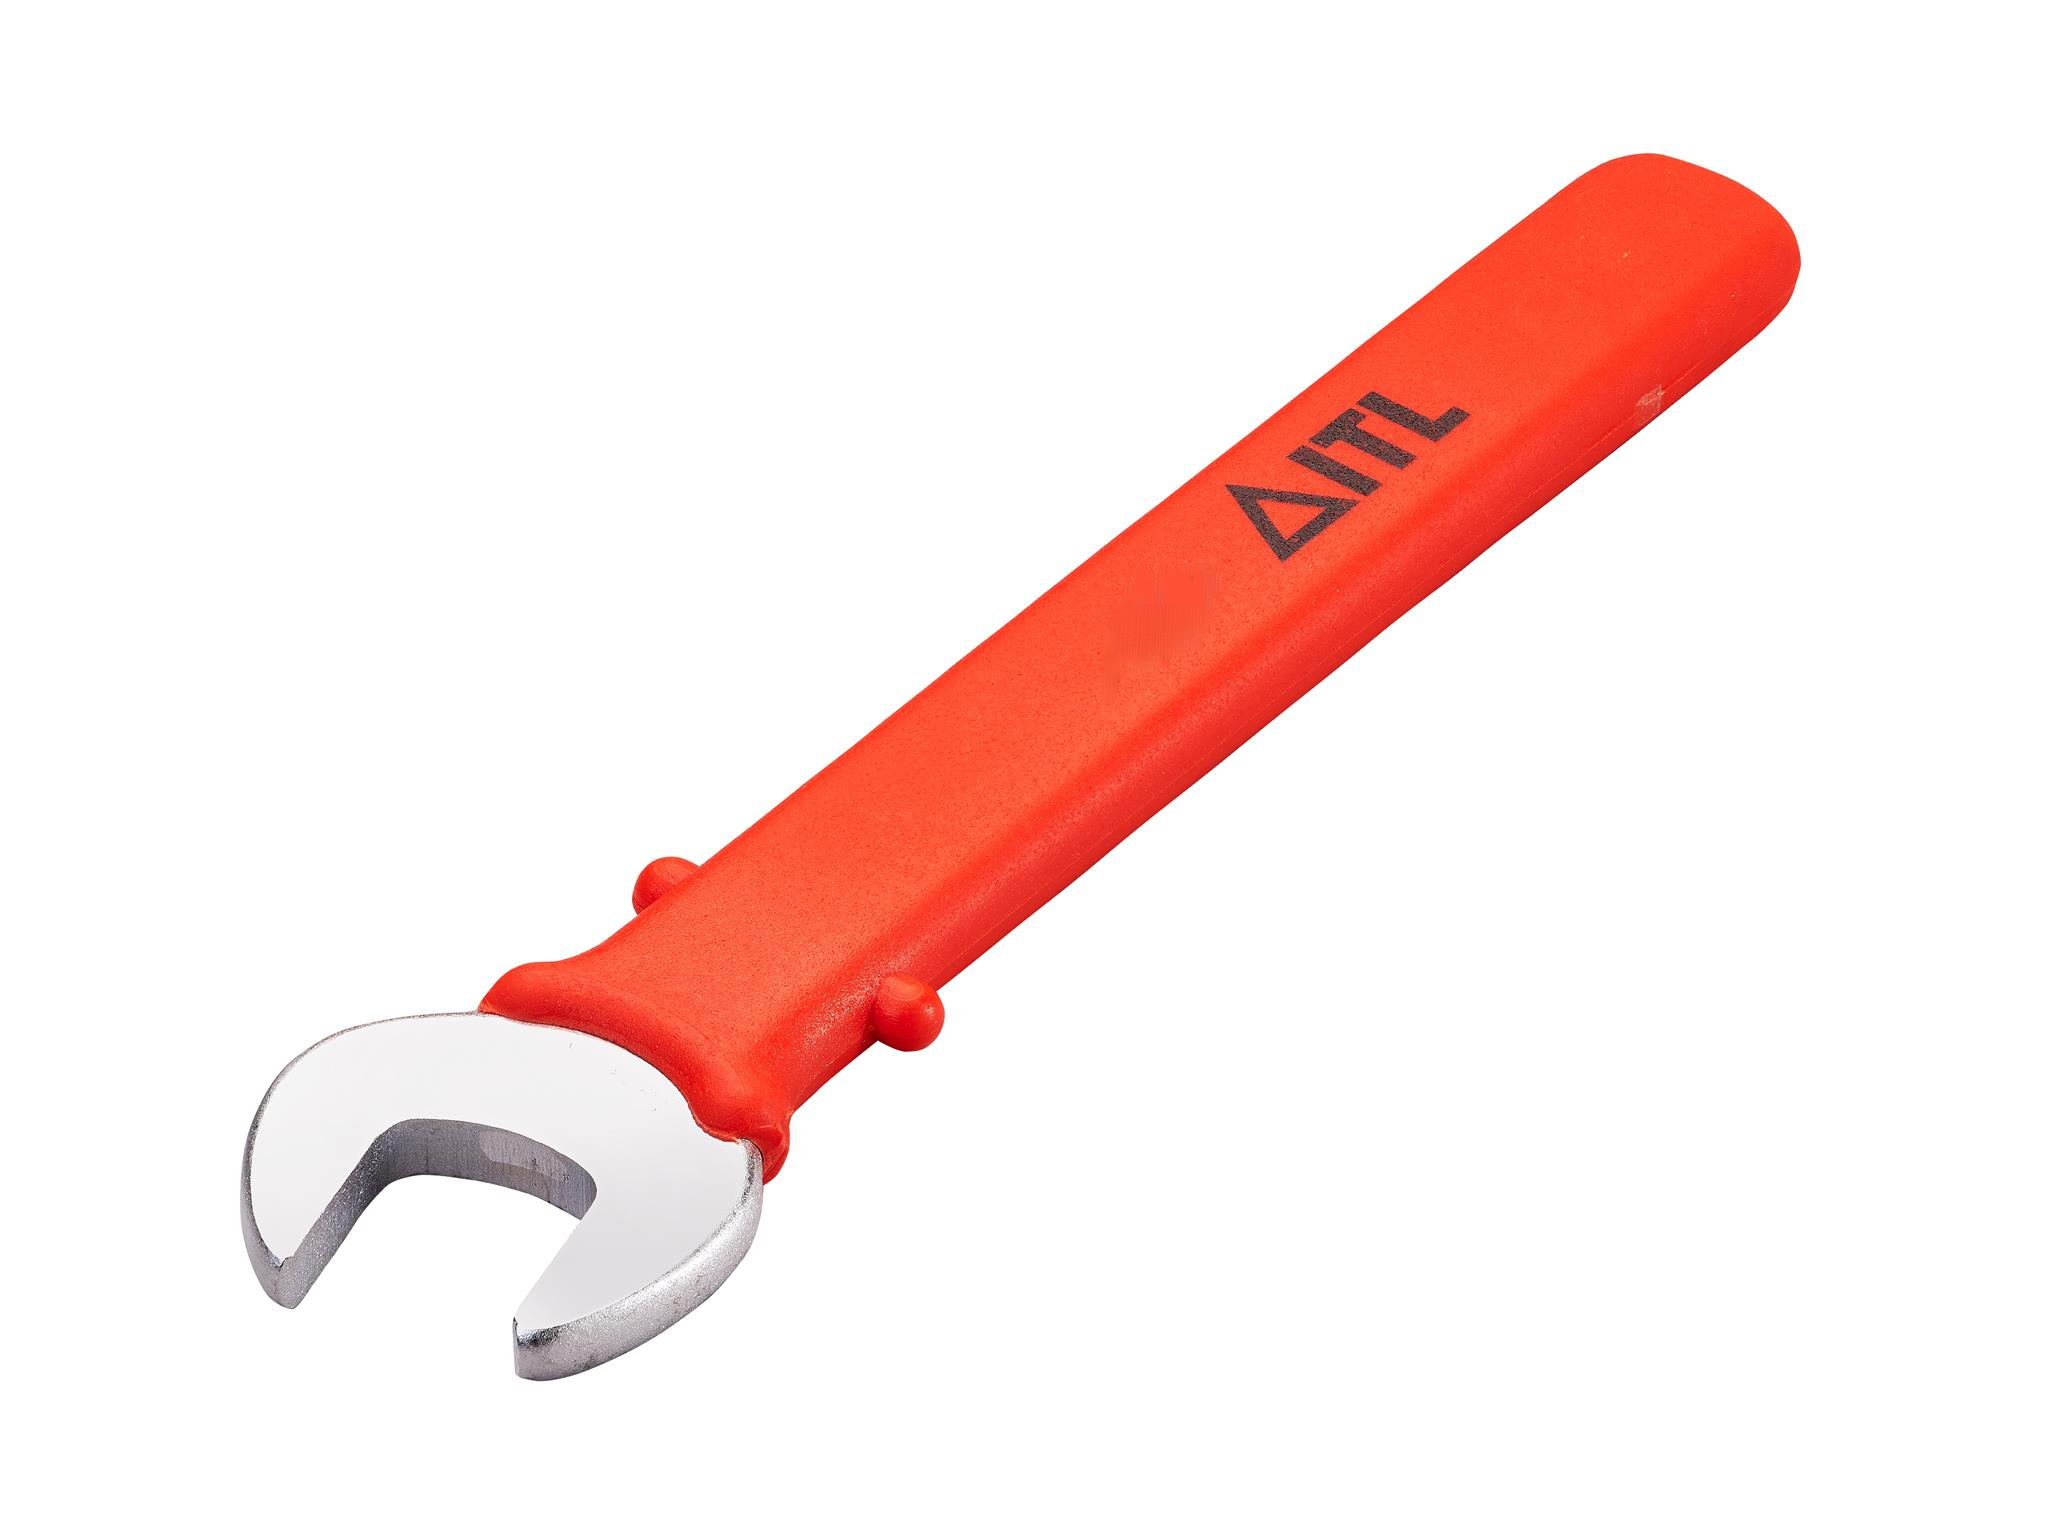 Insulated Spanners